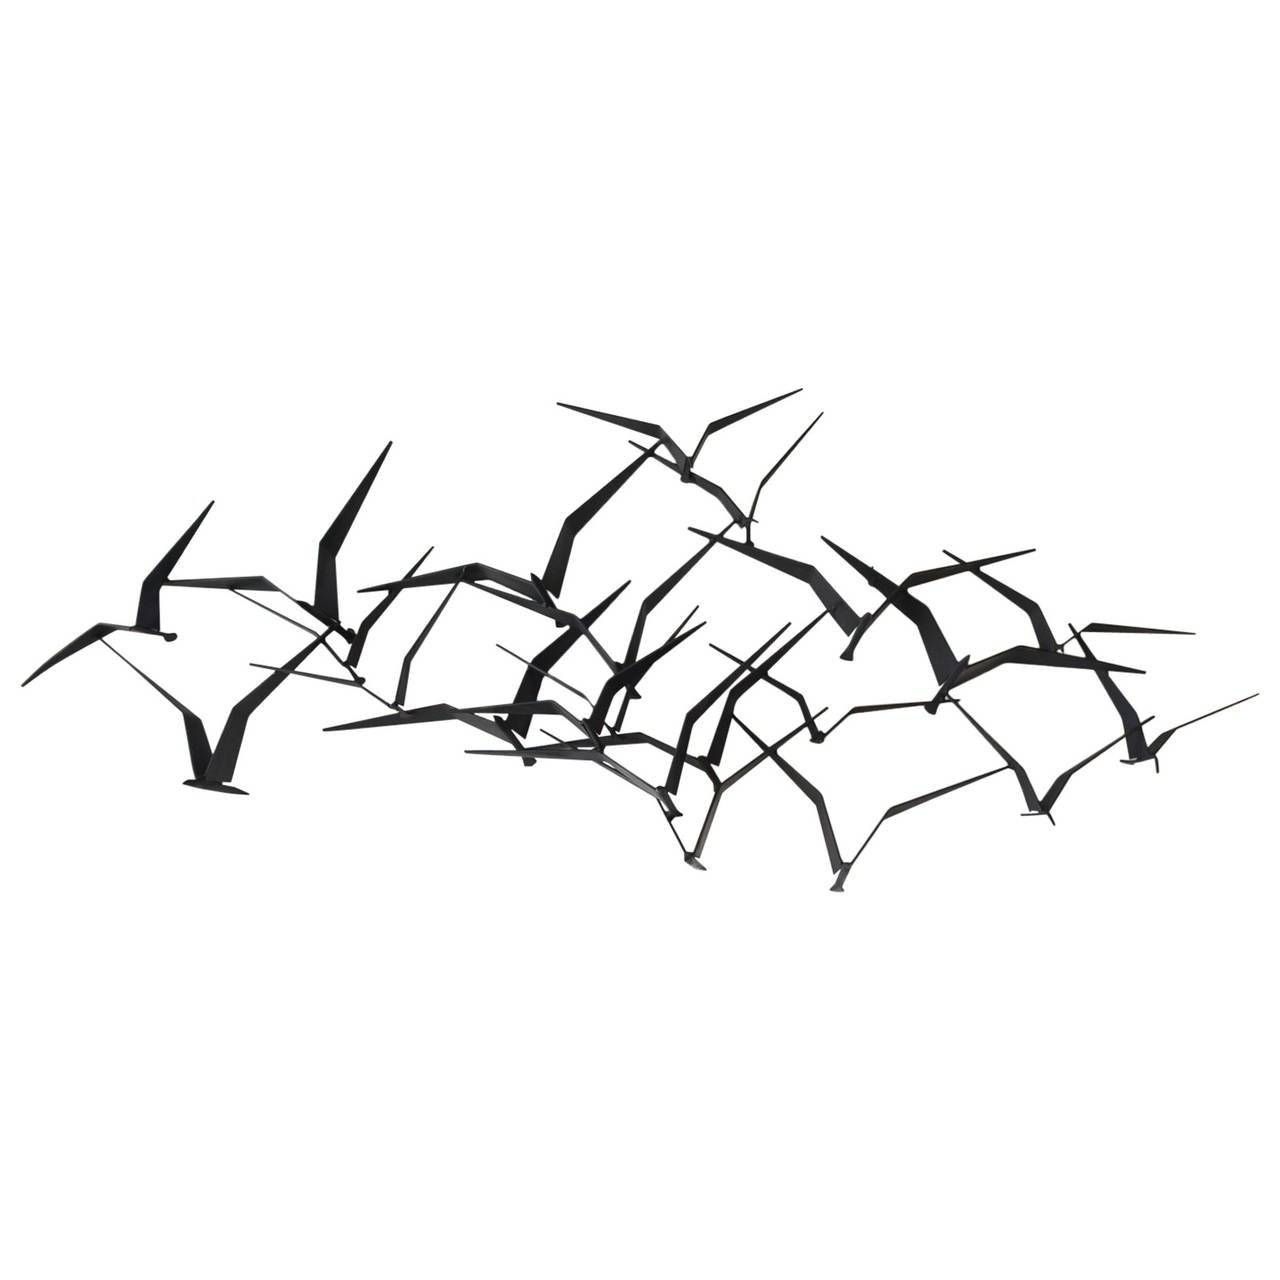 Curtis Jere Birds In Flight Metal Wall Sculpture At 1stdibs Within Most Up To Date Birds In Flight Metal Wall Art (Gallery 28 of 30)